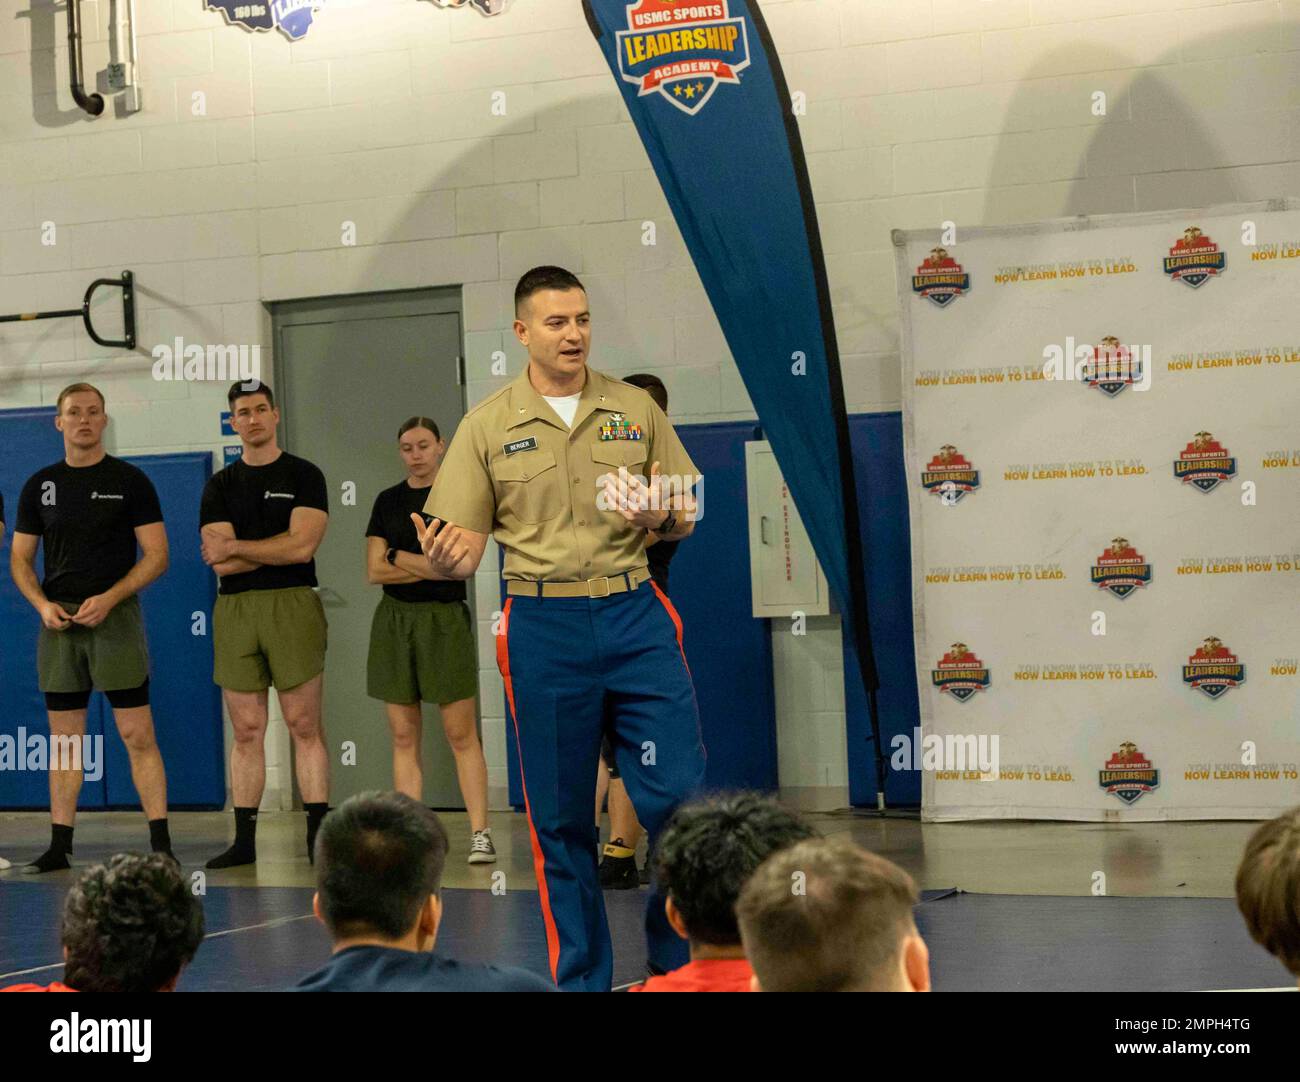 U.S. Marine Corps Major Ryan C. Berger, Commanding Officer of Marine Corps Recruiting Station Columbus, discusses leadership with high school wrestlers at the United States Marine Corps Sports Leadership Academy October 15, 2022, at Olentangy Liberty High School in Columbus, Ohio. The United States Marine Corps Sports Leadership Academy is a free event that helps high school wrestlers strengthen their wrestling skills and learn leadership principles from Marines. Stock Photo